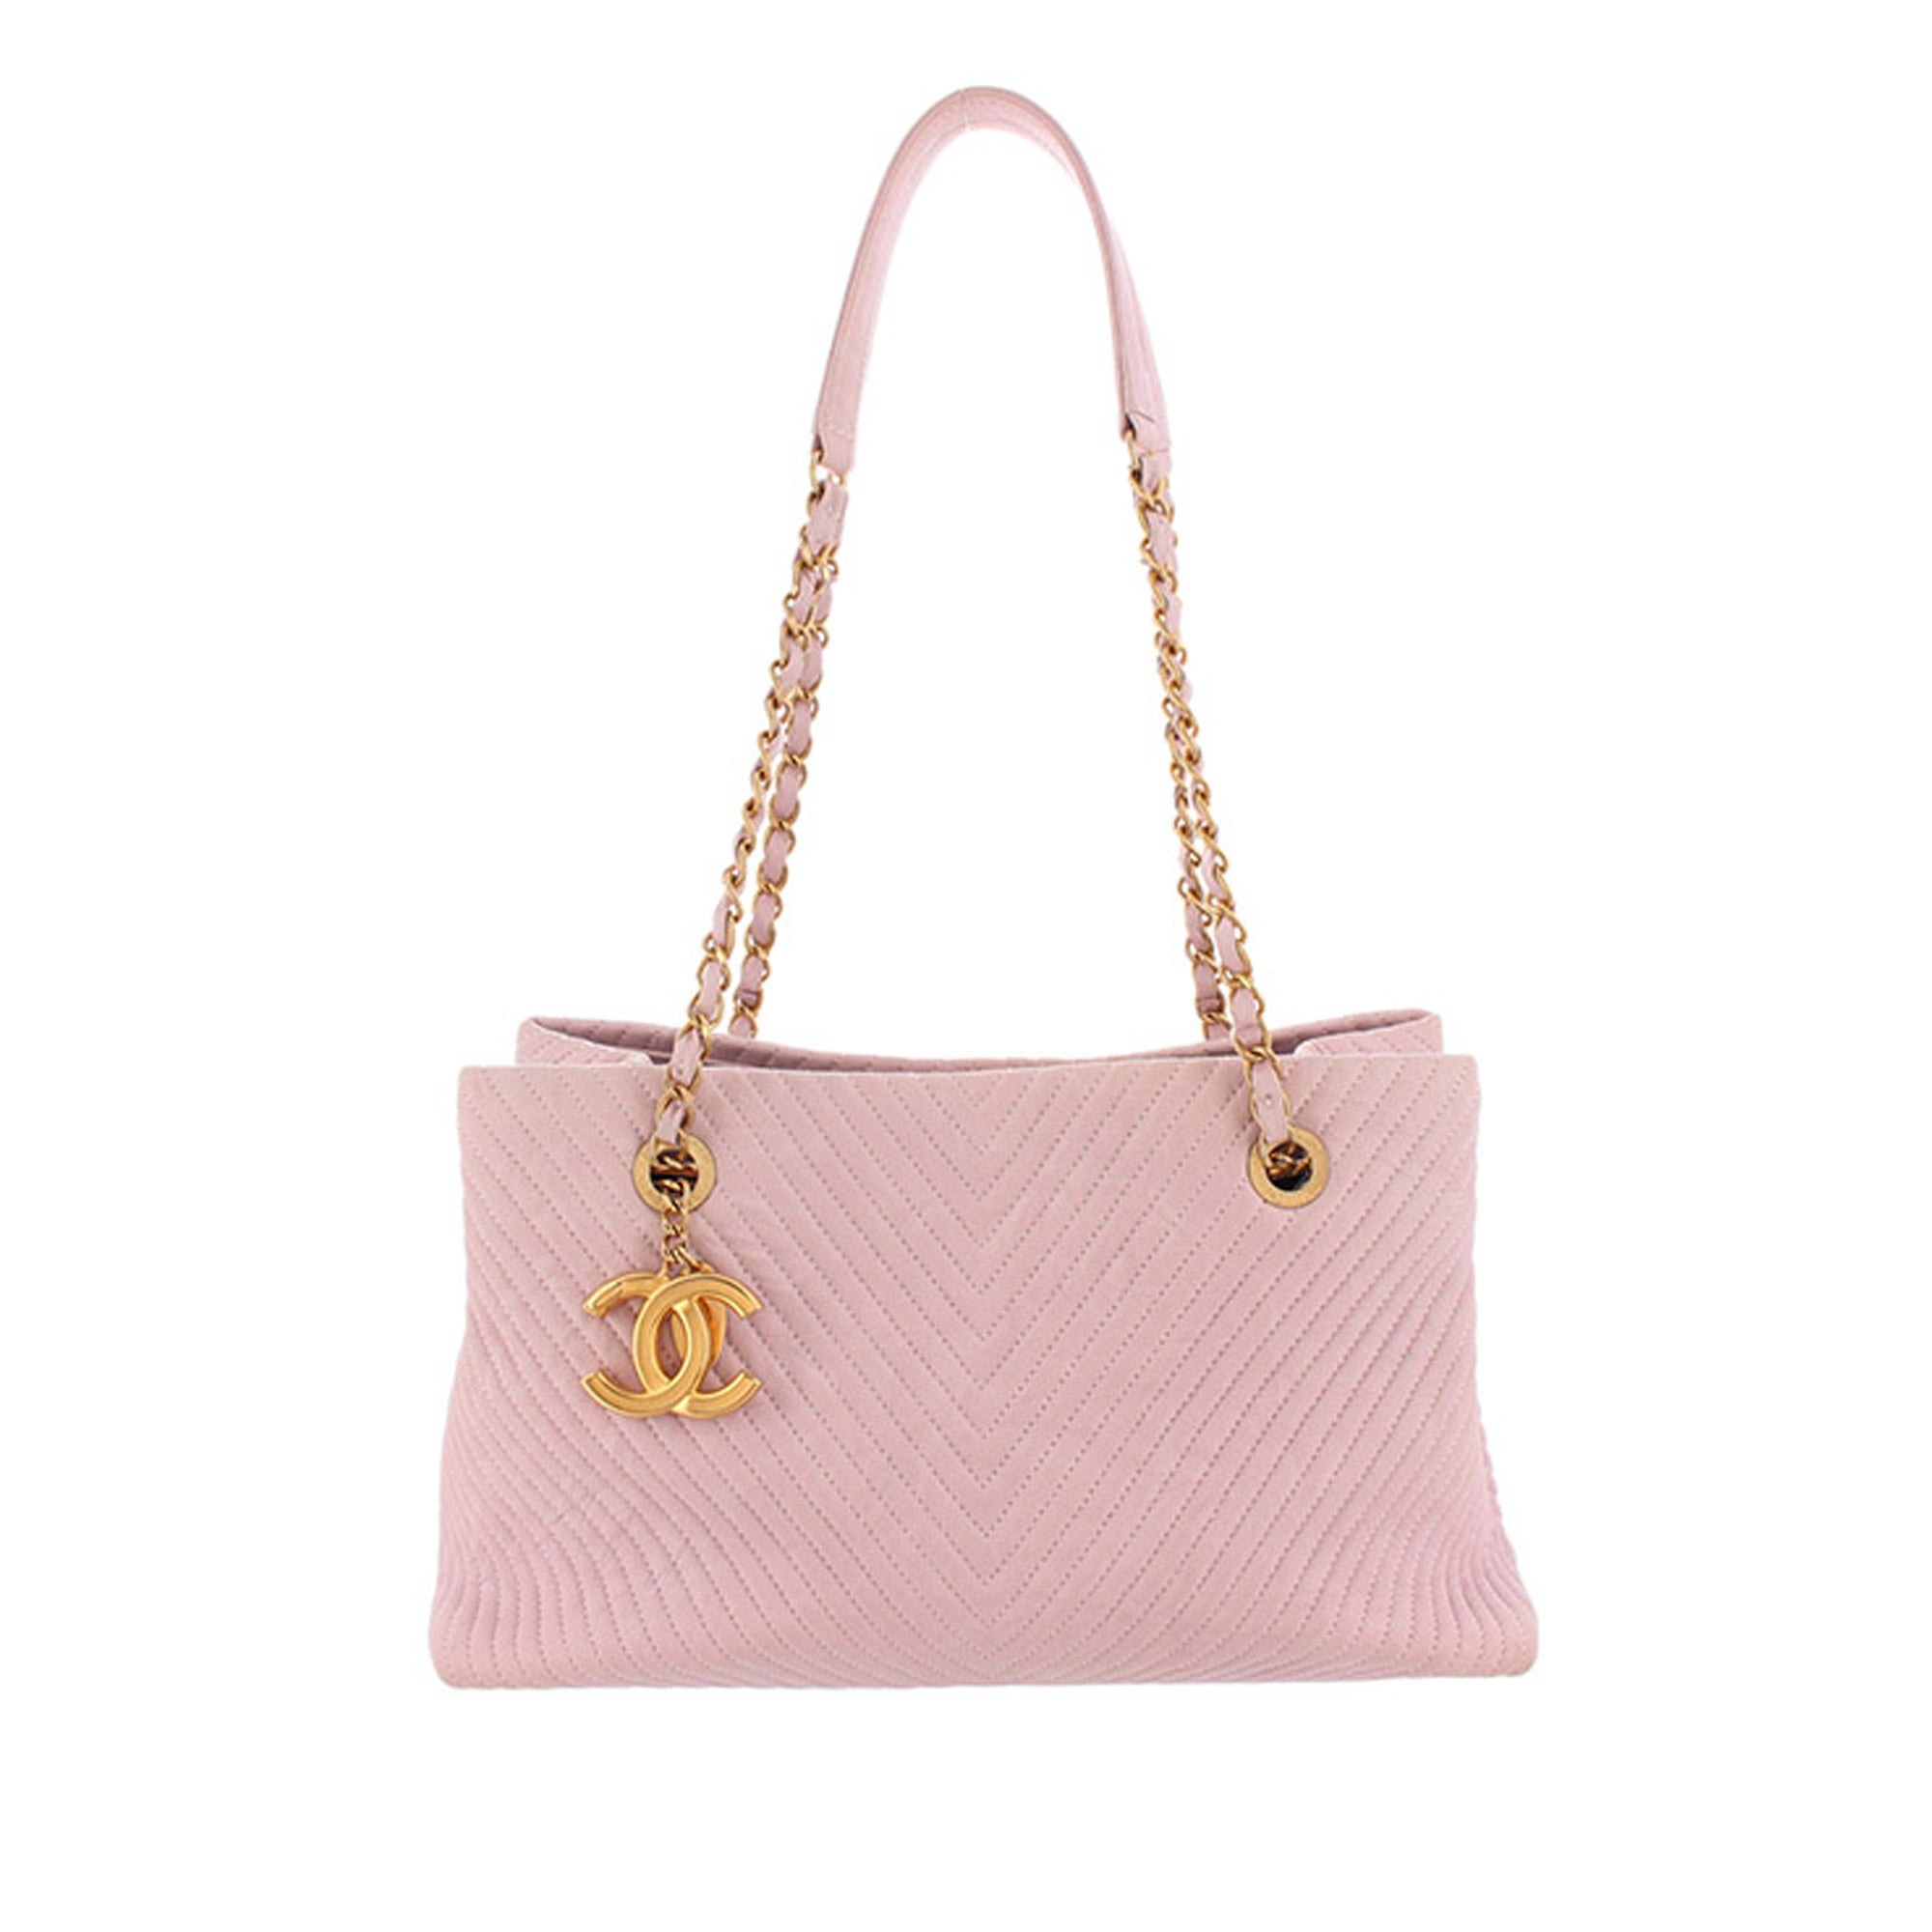 Chanel Chevron Leather Tote Bag Pink